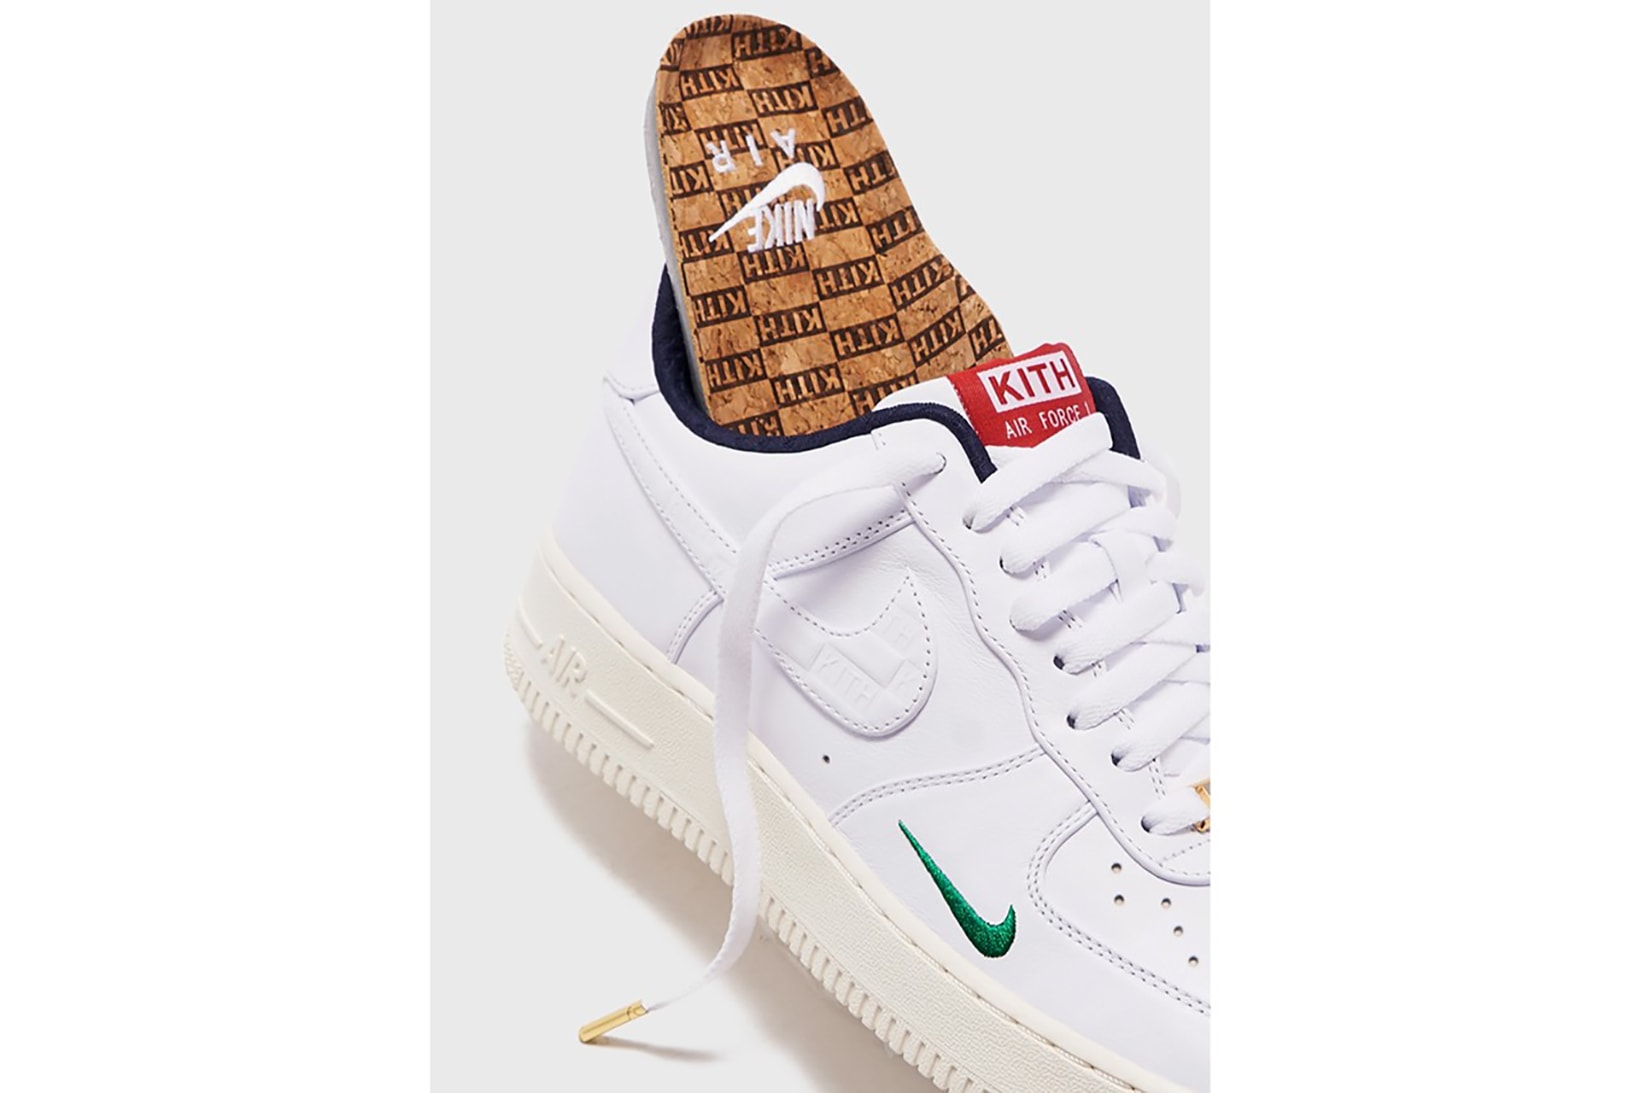 kith nike air force 1 low collaboration sneakers raffle charity ronnie fieg white green red blue sneakerhead shoes footwear